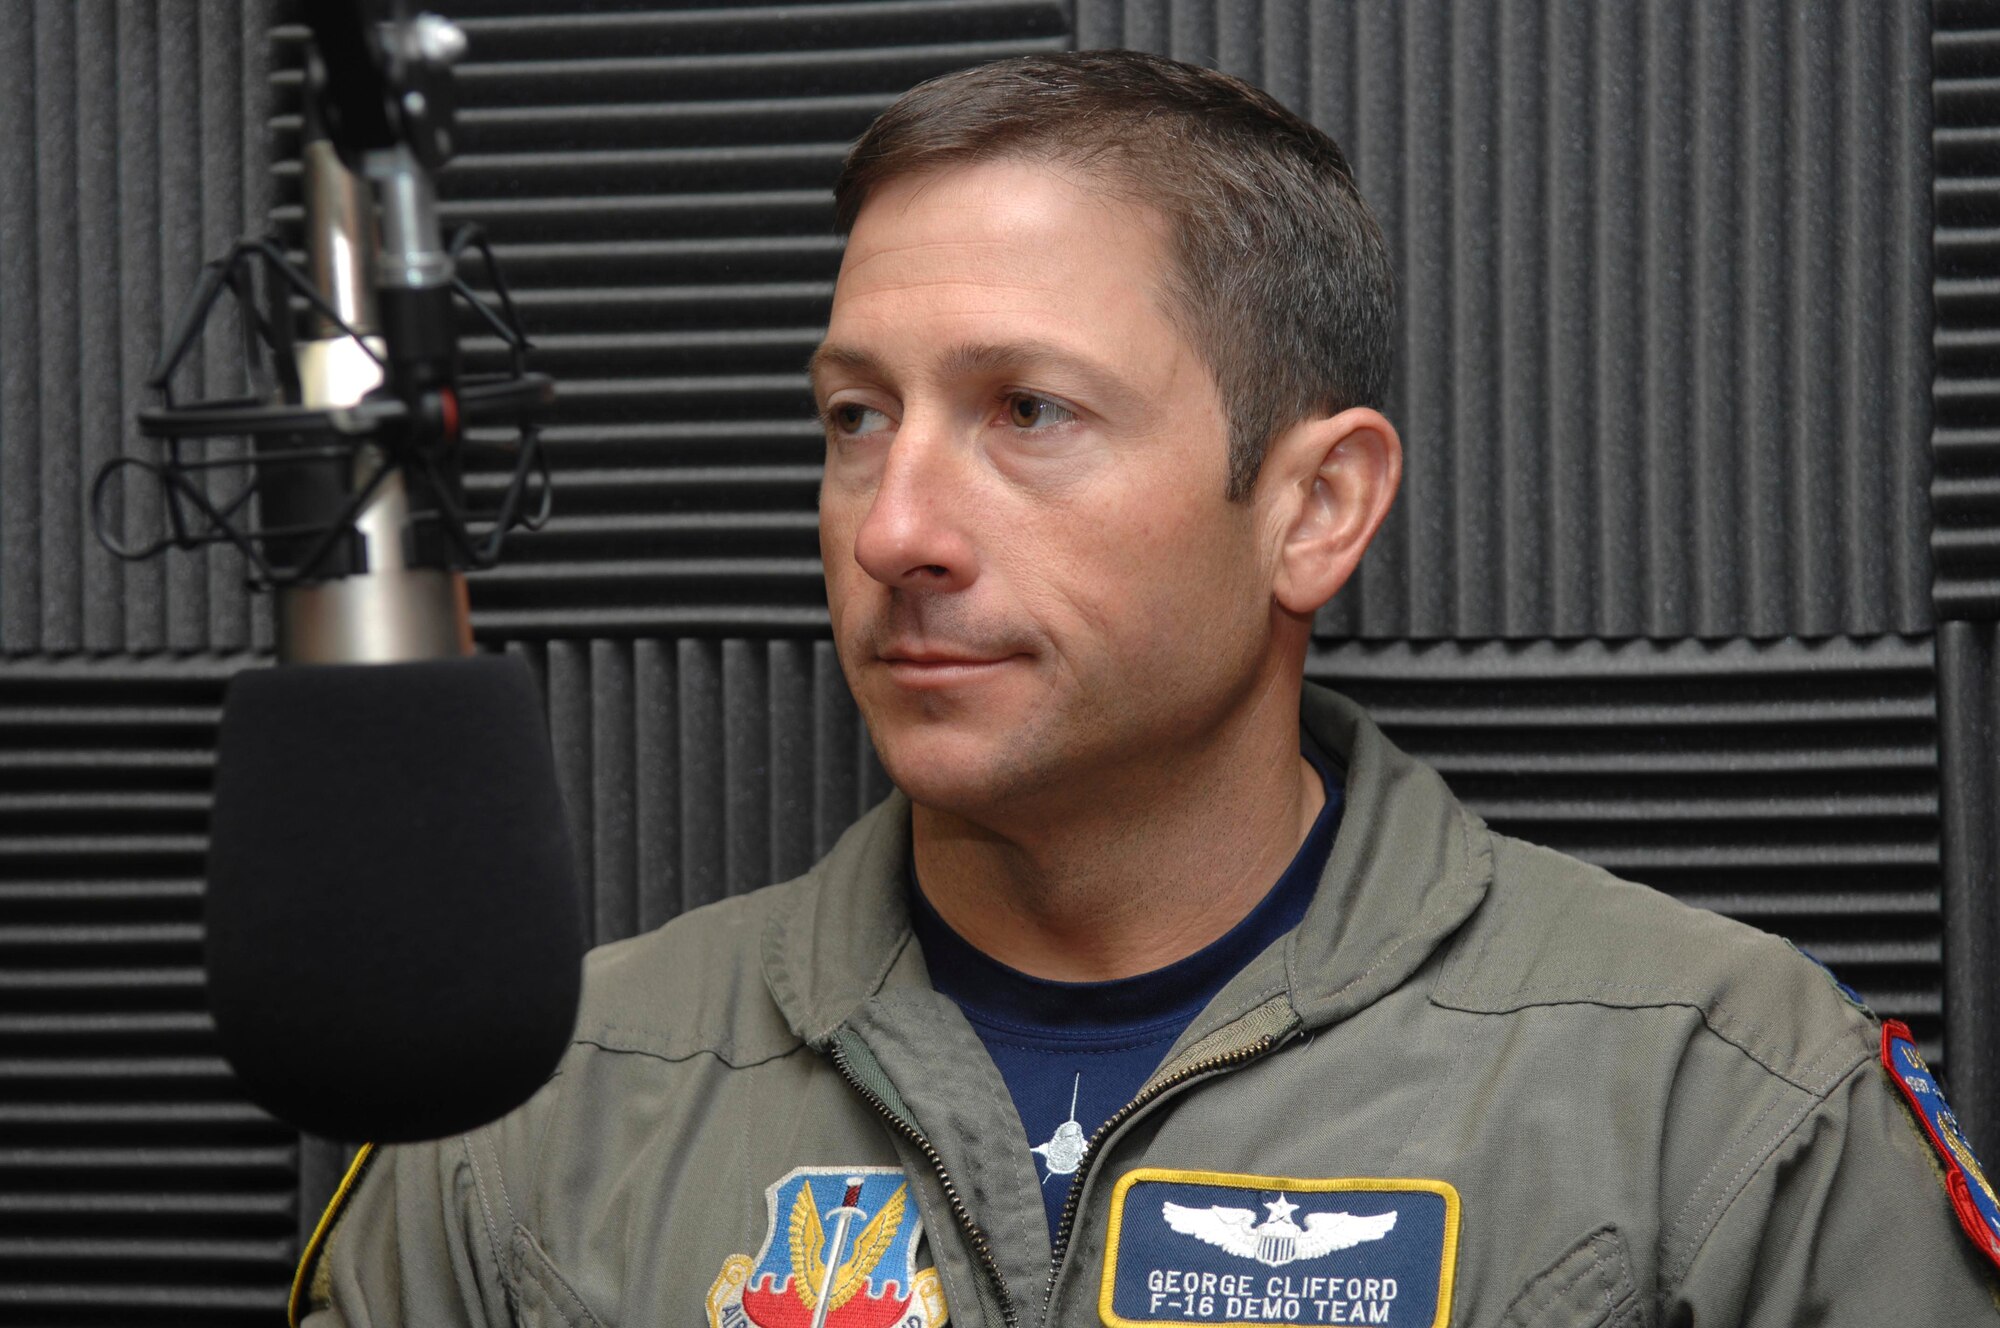 FLORENCE, S.C.-- Capt. George Clifford, F-16 Viper East Demonstration Team pilot, discusses the Florence air show, May Fly, on STAR 93.7 at Miller Communications May 22. The program broadcasted on a 6,000-watt signal covering a 40-mile radius with daytime coverage in Florence, Darlington, Hartsville, Timmonsville, Lake City and Bishopville. (U.S. Air Force photo/Staff Sgt. Nathan Bevier)